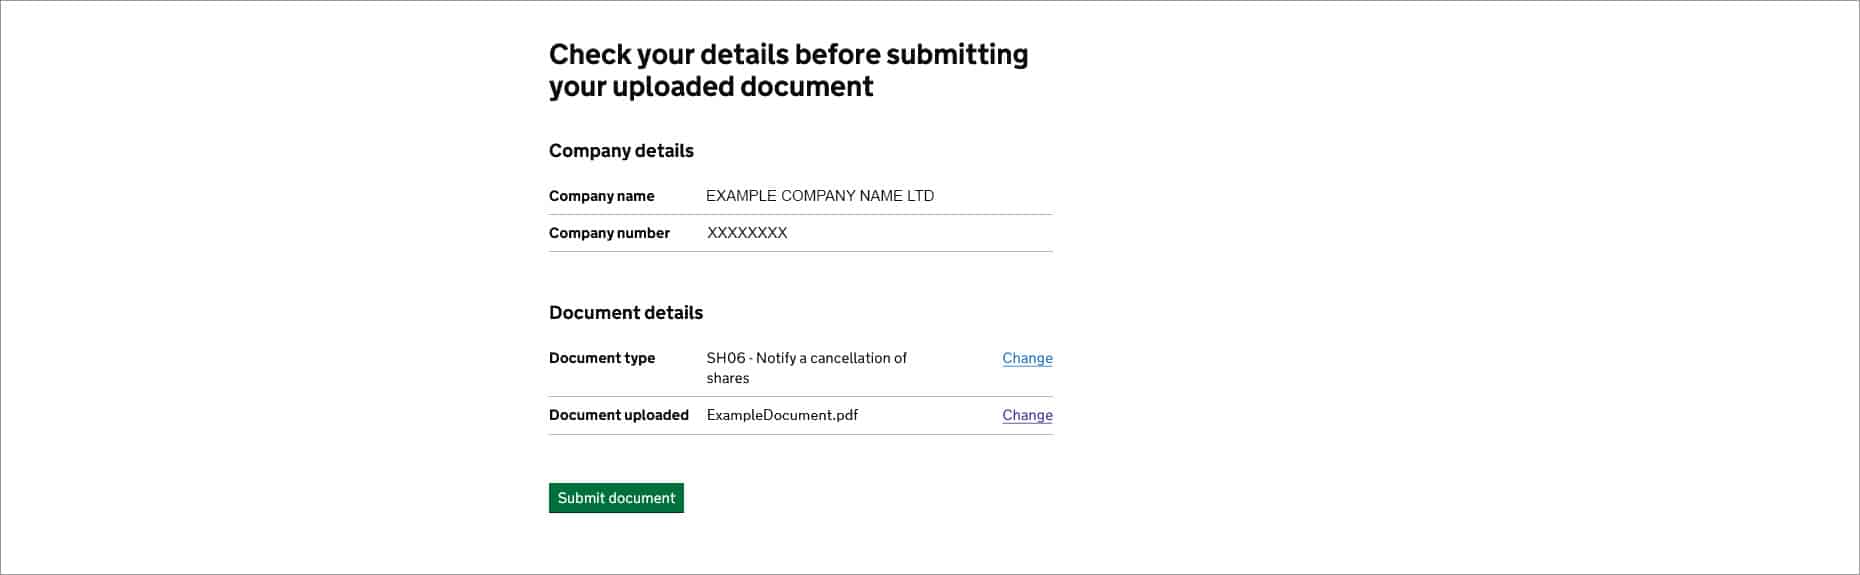 Check your details before submitting your uploaded document